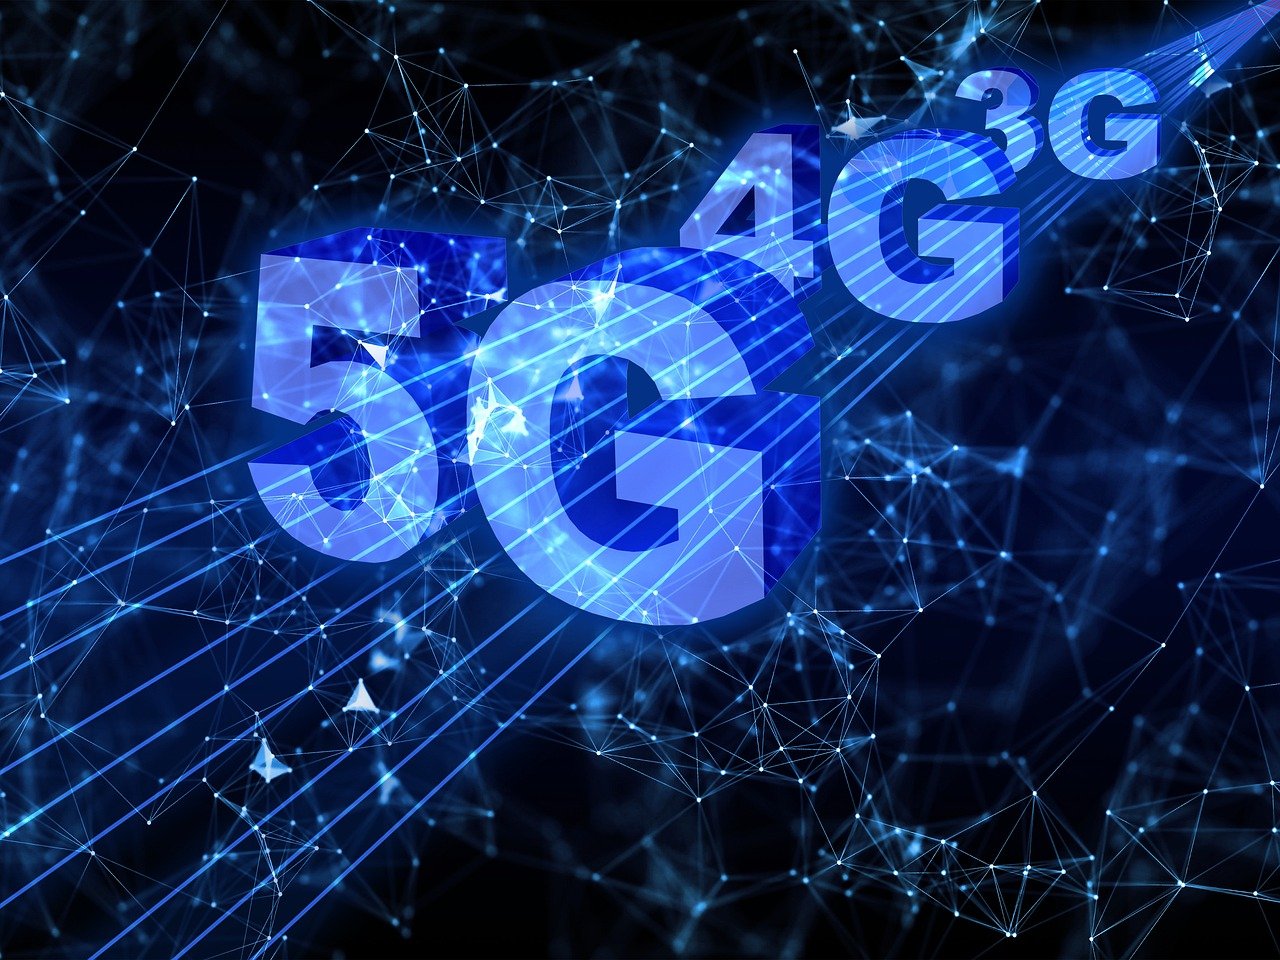 Ericsson and Bahrain's Batelco collaborate on next-gen 5G technologies